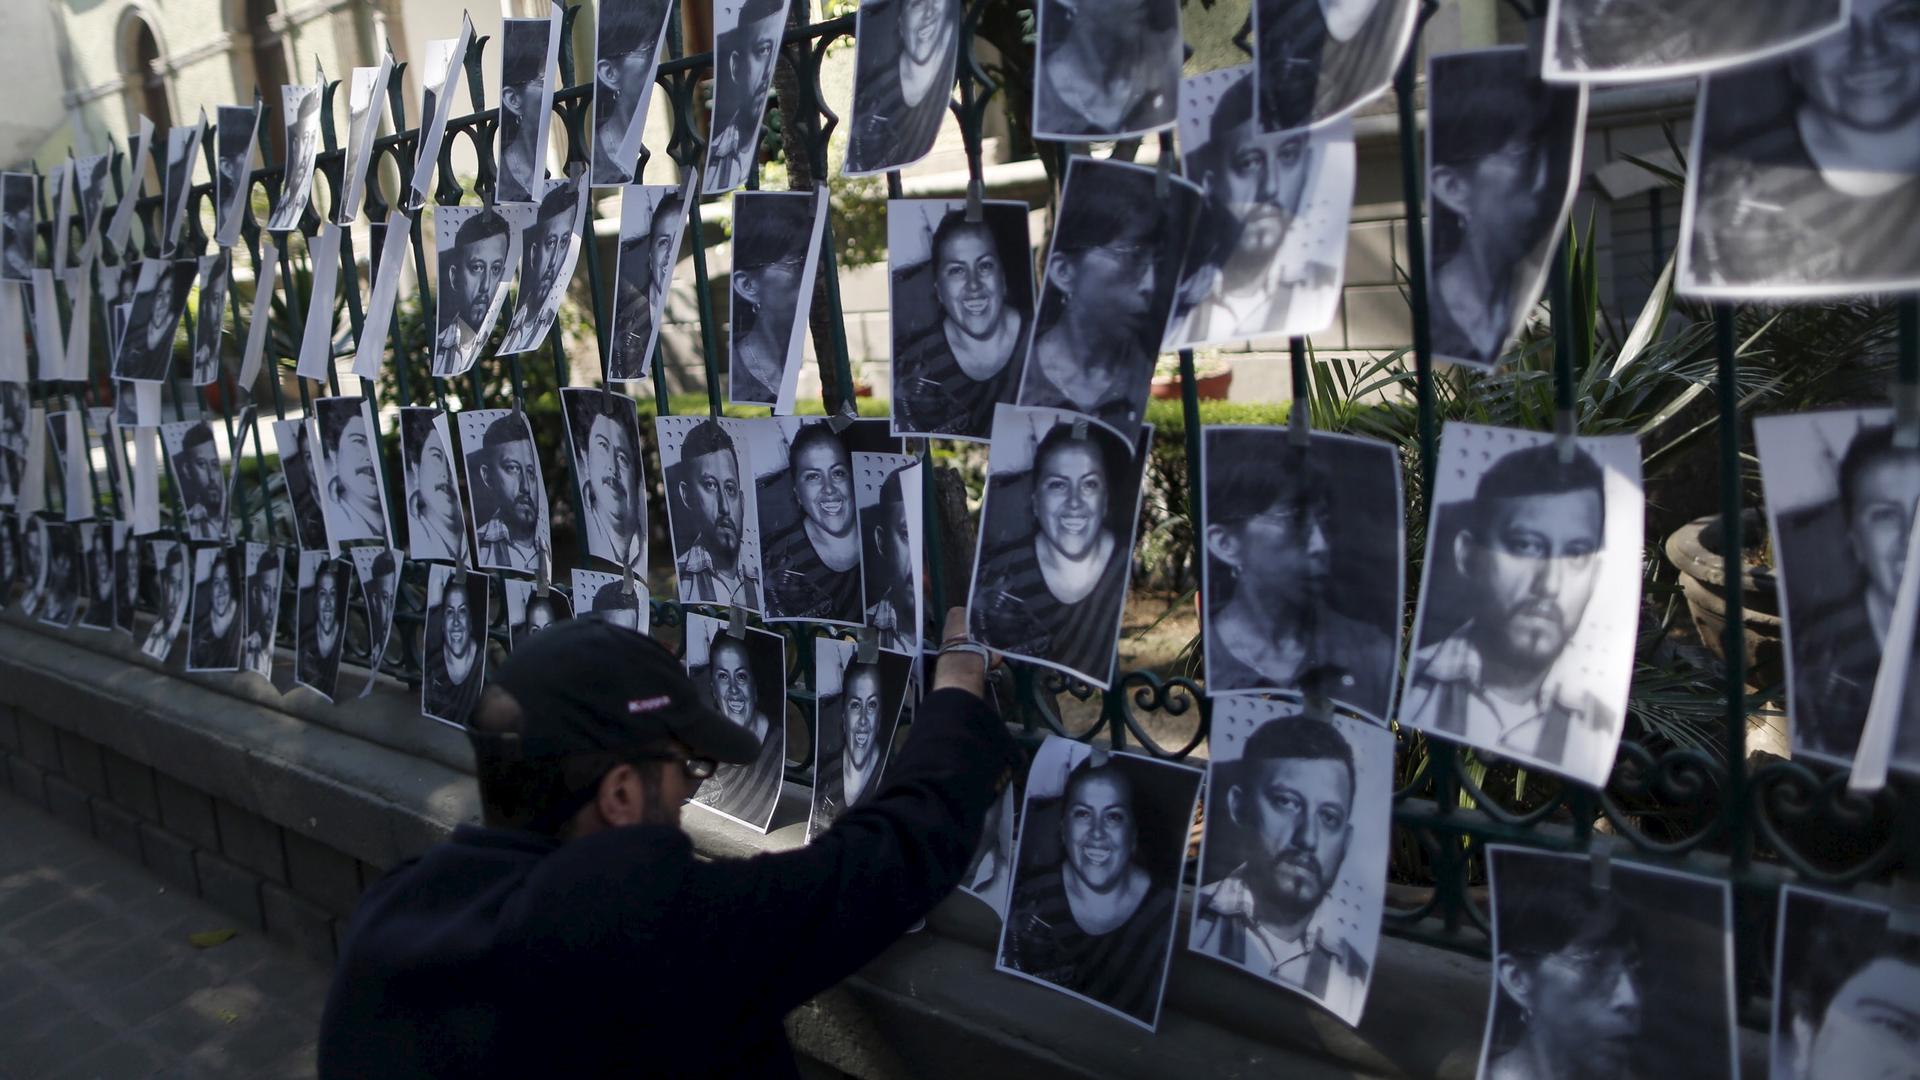 A man hangs images of murdered journalists during a demonstration against the murder of a journalist Anabel Flores outside the Government of Veracruz building in Mexico City, February 11, 2016.